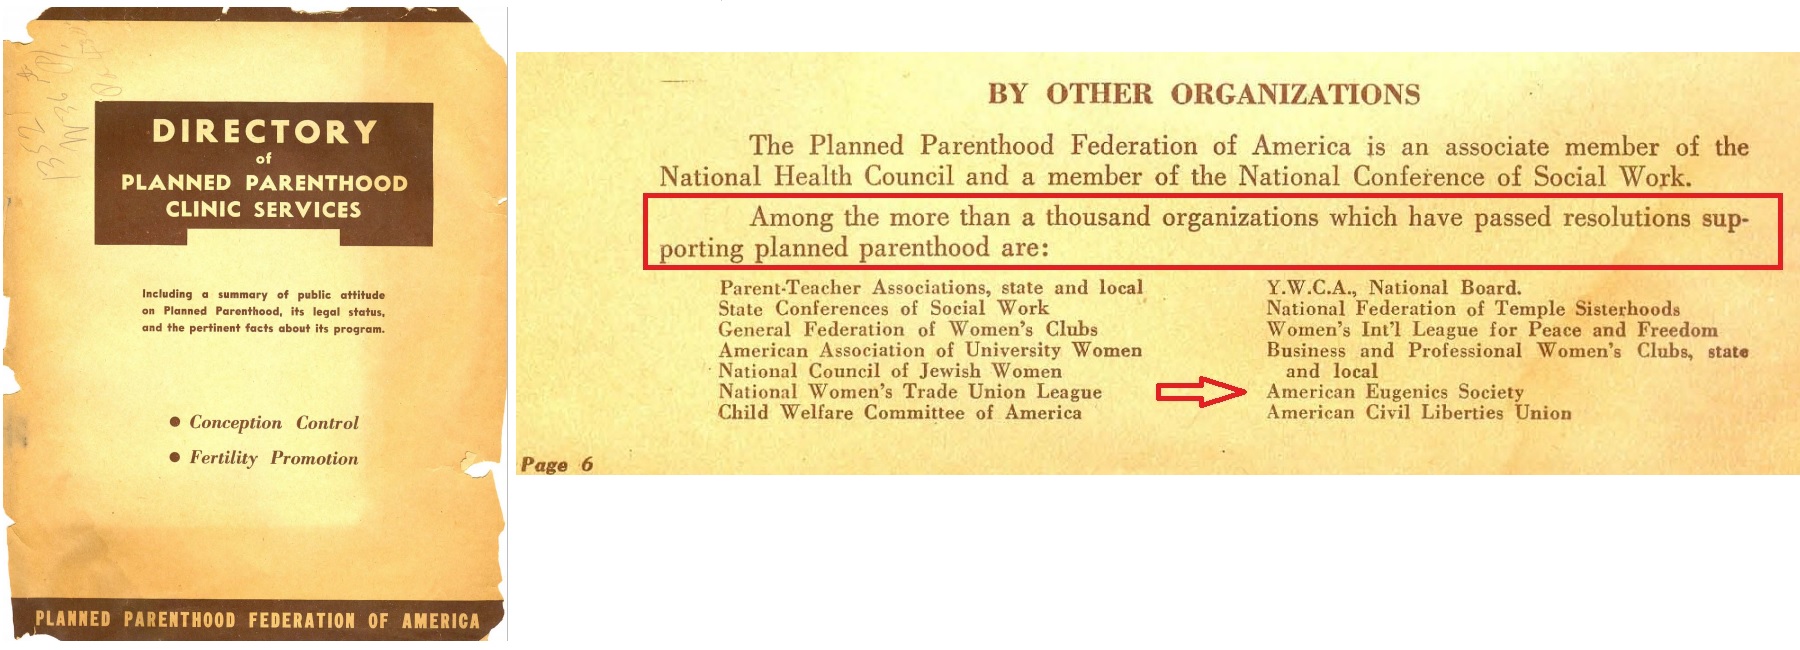 Image: American Eugenics Society supports Planned Parenthood 1945 brochure